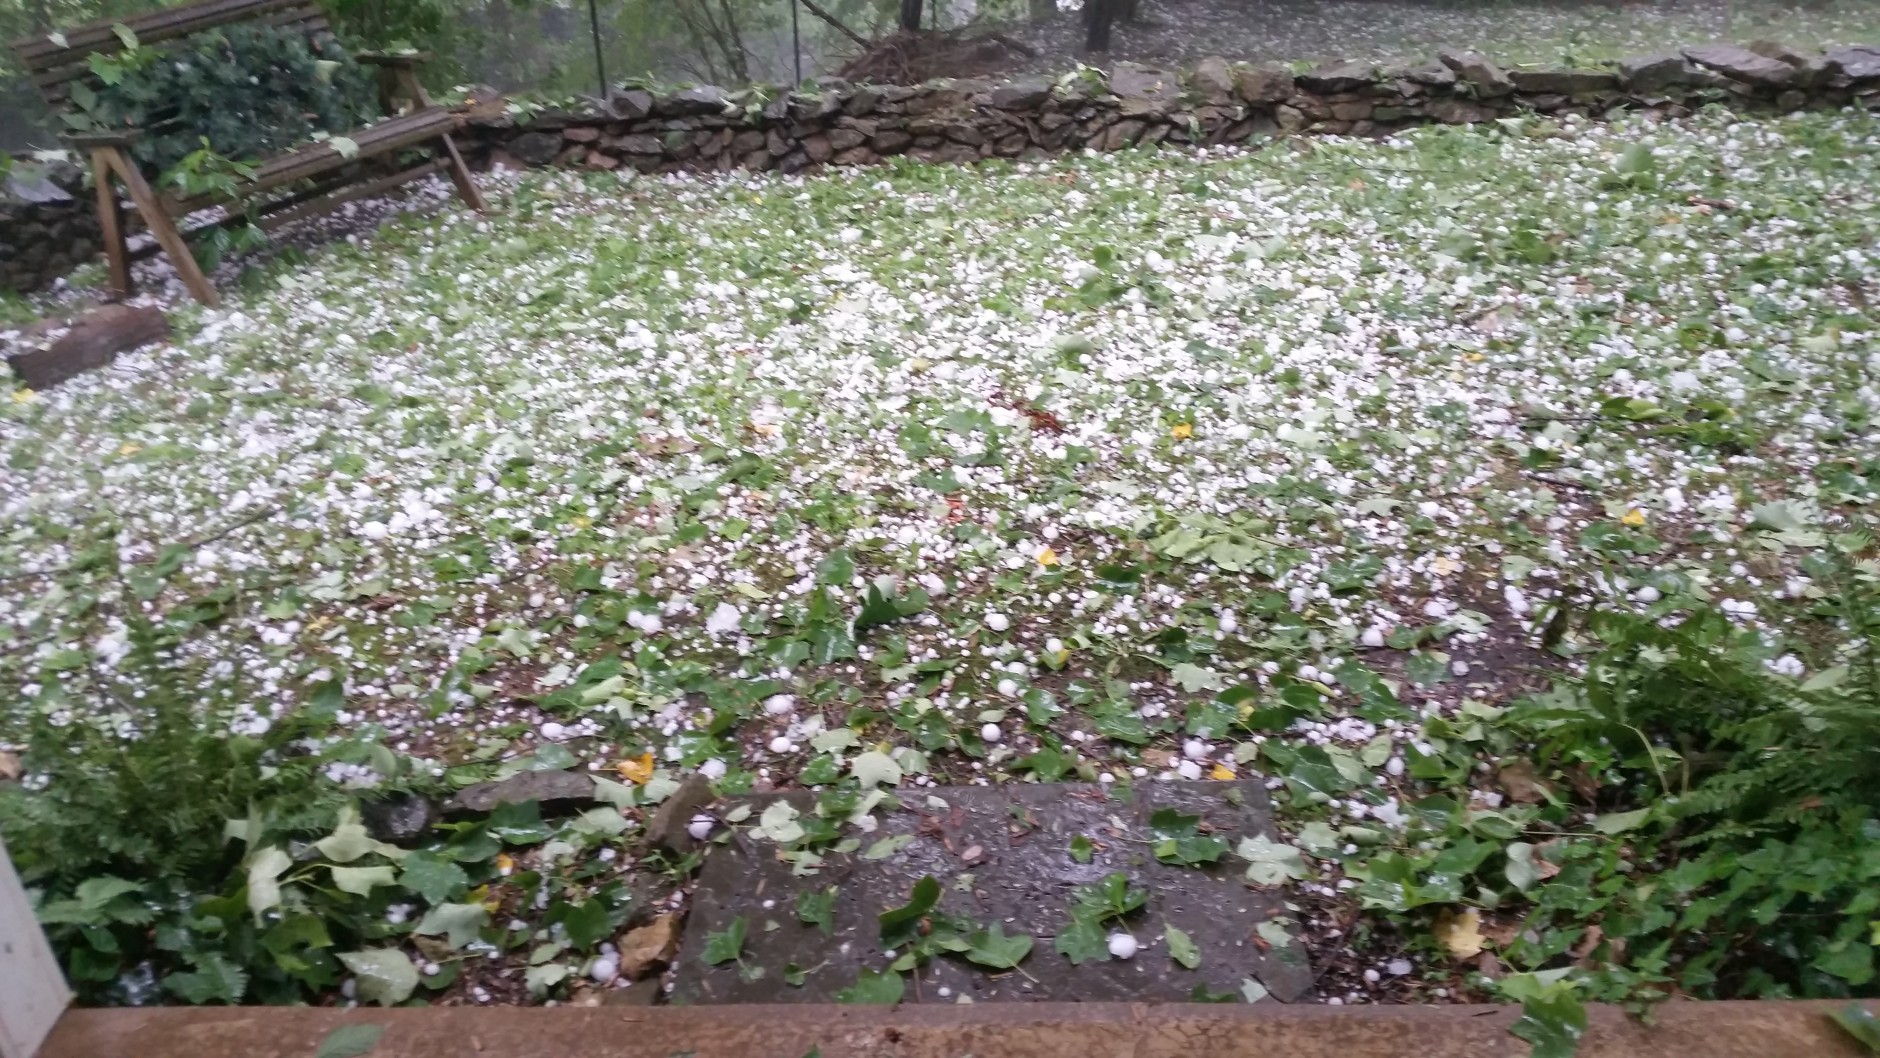 Hail in Middleburg, Virginia on June 16, 2016. (Image sent in to talkback@WTOP.com)